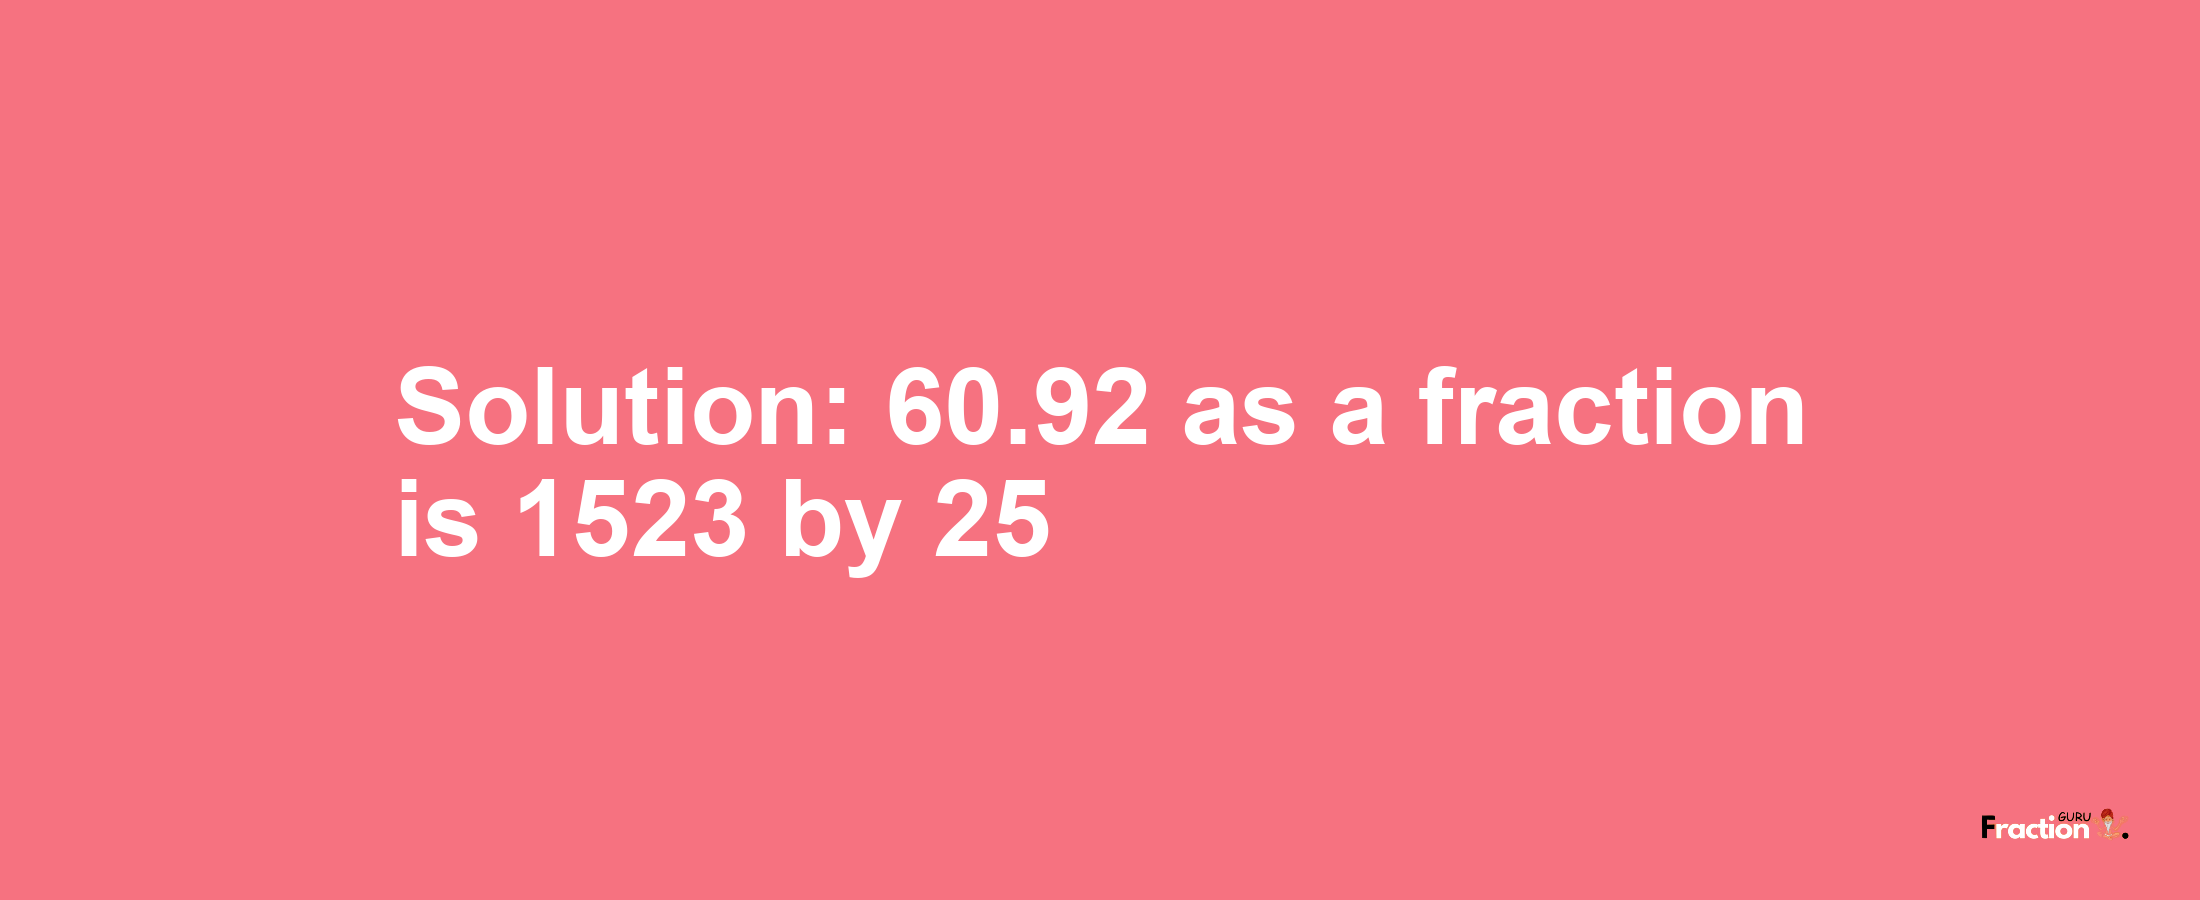 Solution:60.92 as a fraction is 1523/25